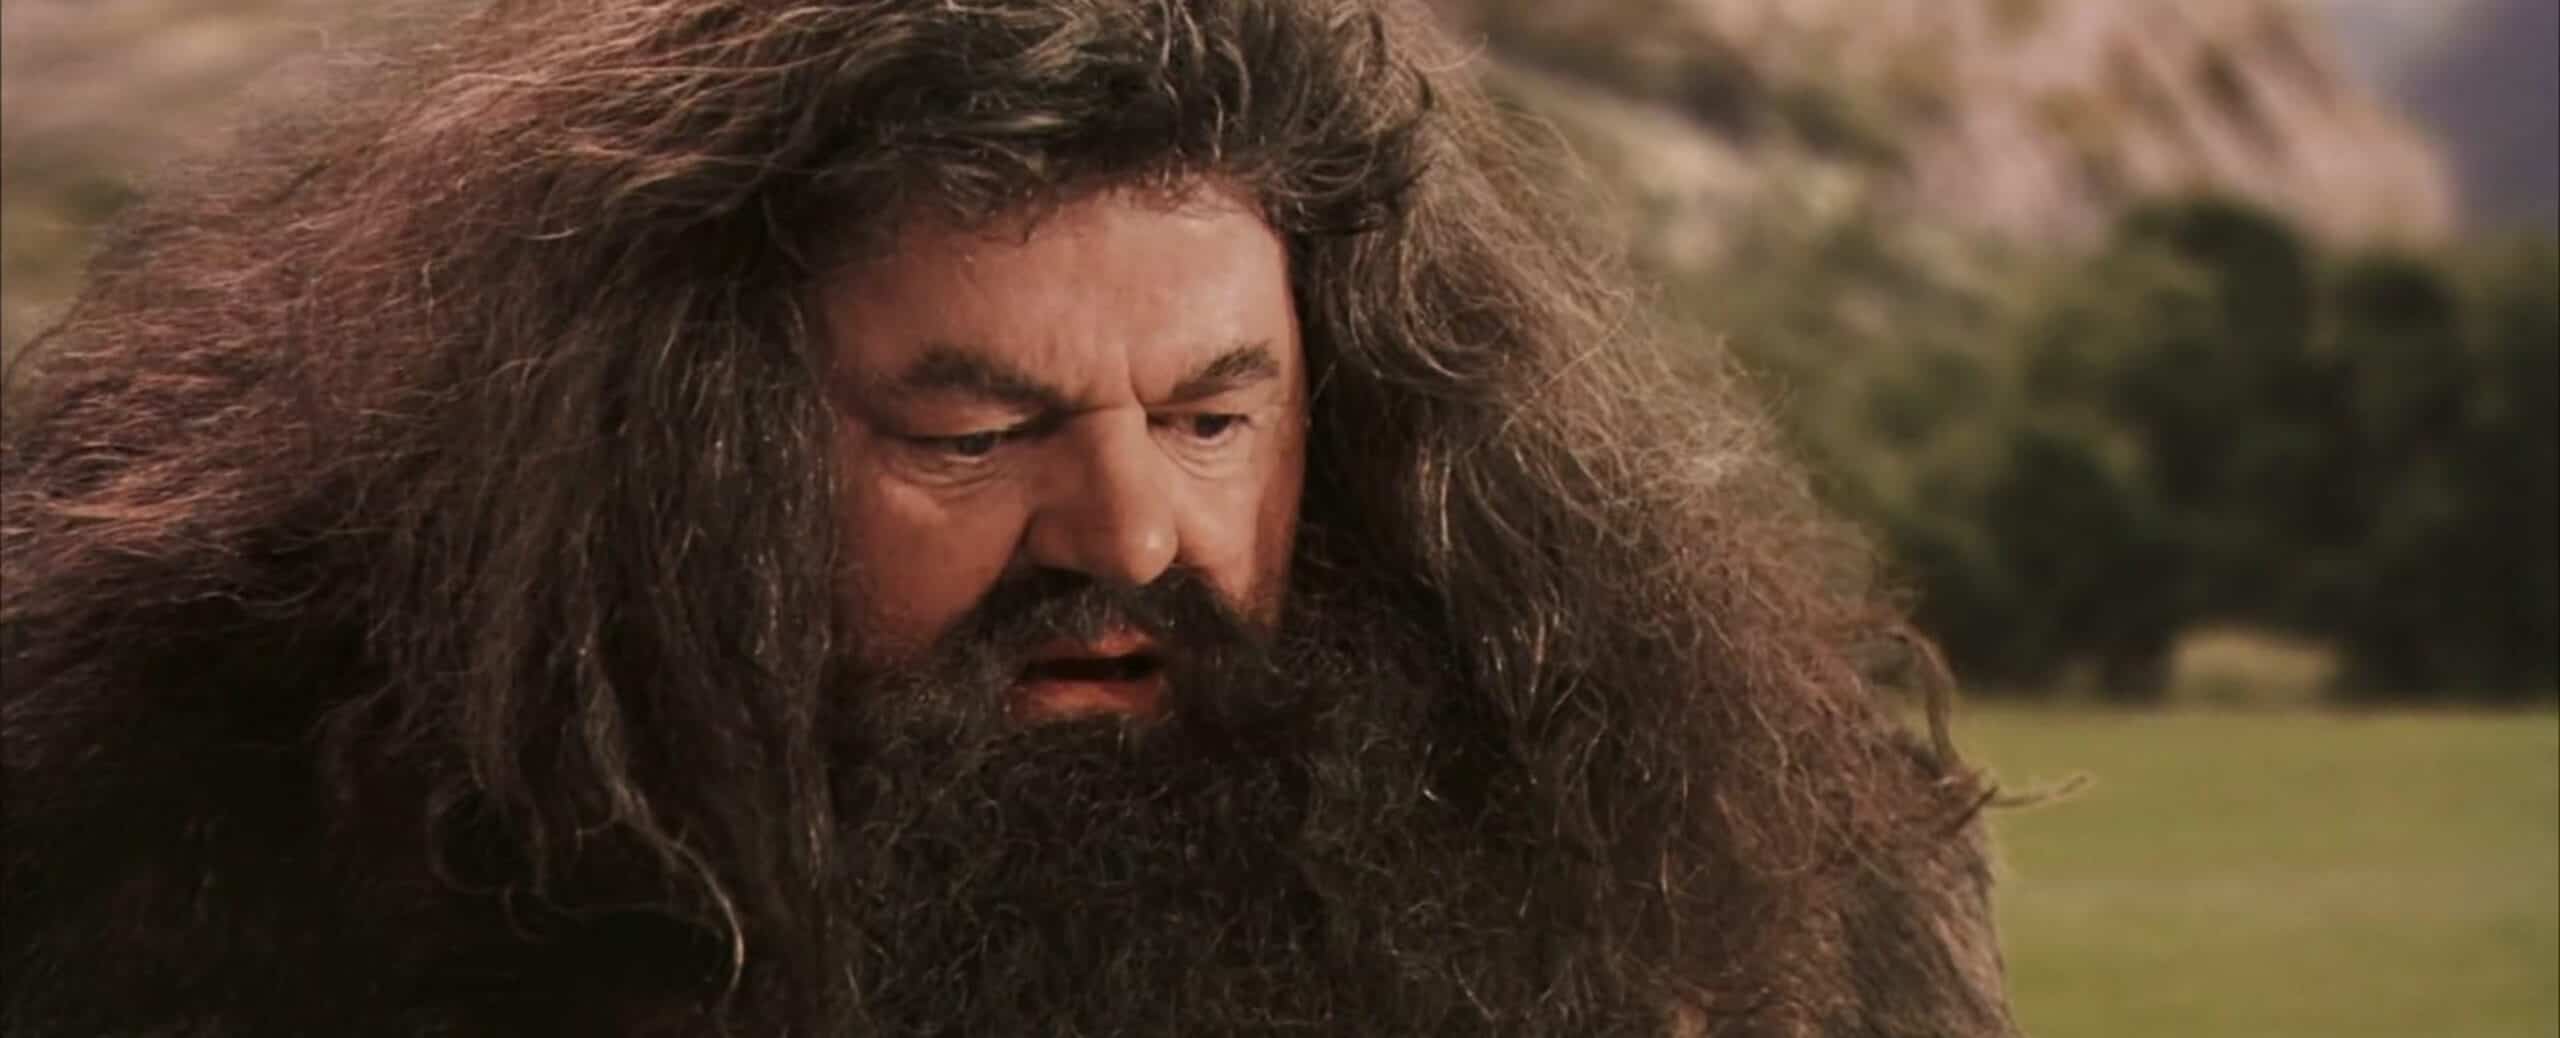 <ul> <li><strong>Who said it:</strong> Hagrid</li> <li><strong>Played by:</strong> Robbie Coltrane</li> <li><strong>Movie:</strong> Harry Potter and the Sorcerer's Stone (2001)</li> </ul> <p>This is perhaps the most famous line in all of Harry Potter because it's the moment Harry finds out who he really is. This line, delivered by Hagrid, is one that has been repeated by Harry Potter fans everywhere ever since "Harry Potter and the Sorcerer's Stone" made it to the big screen.</p>